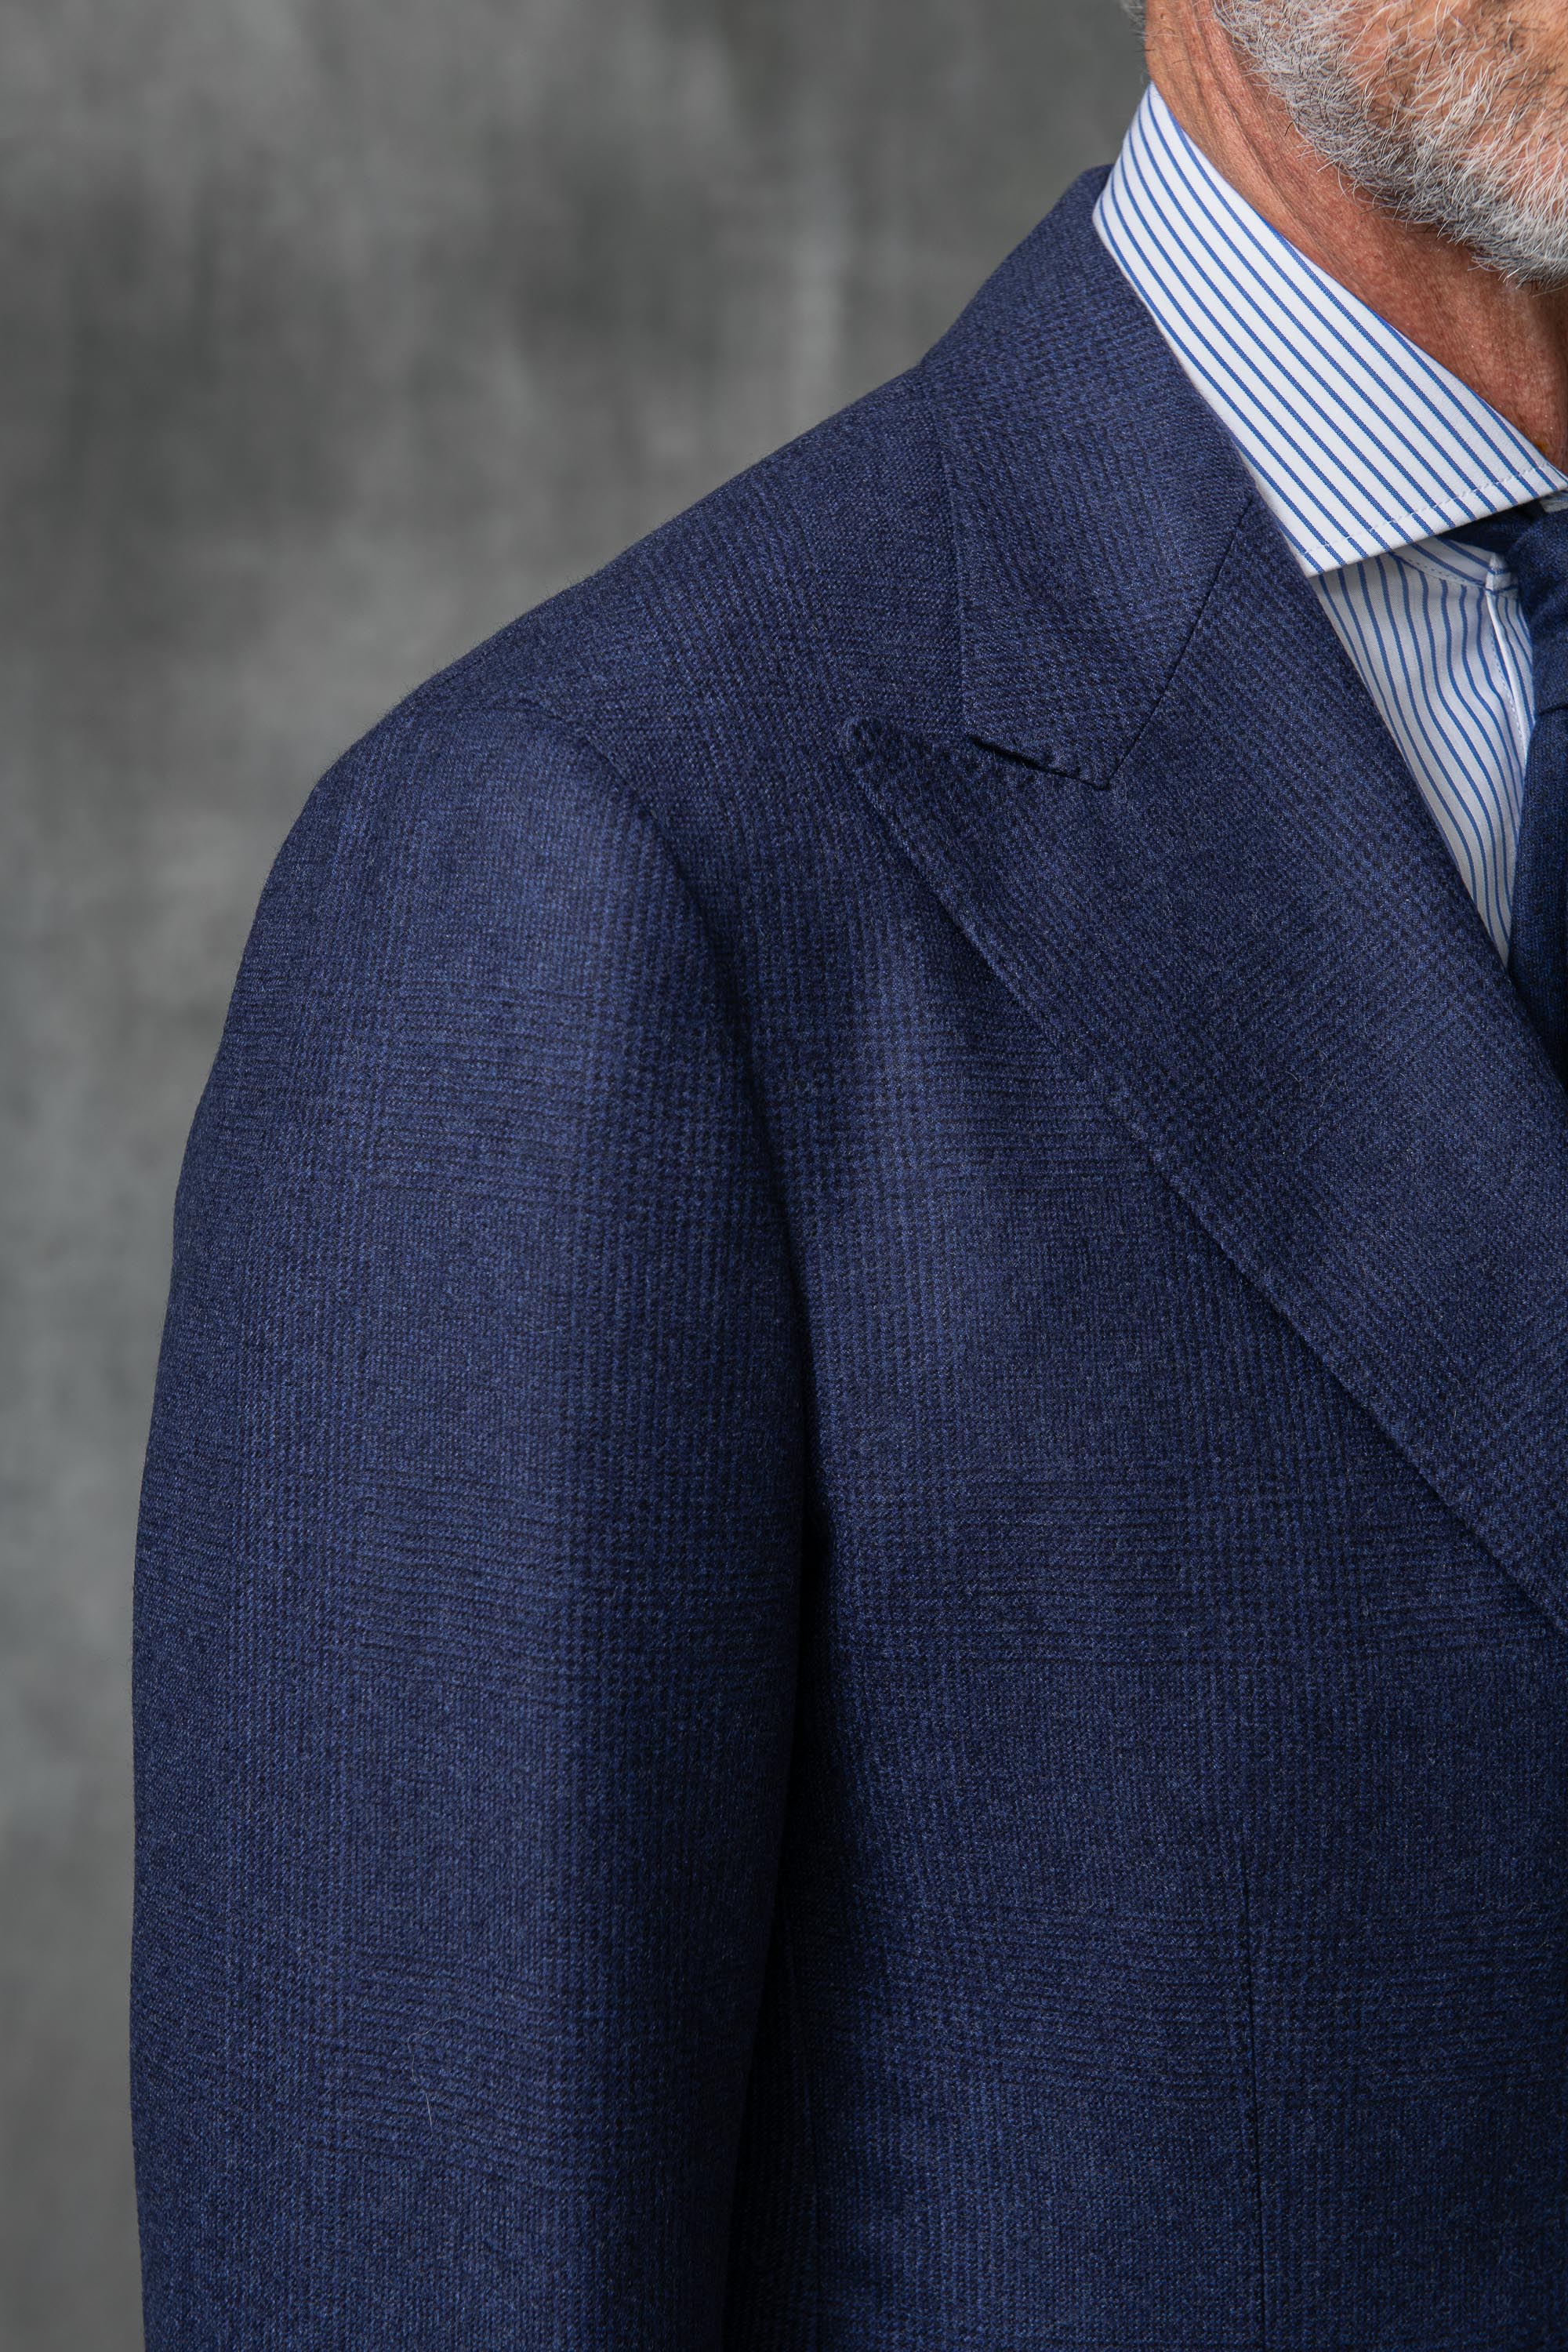 Blue prince of wales suit "Soragna Capsule Collection" - Made in Italy